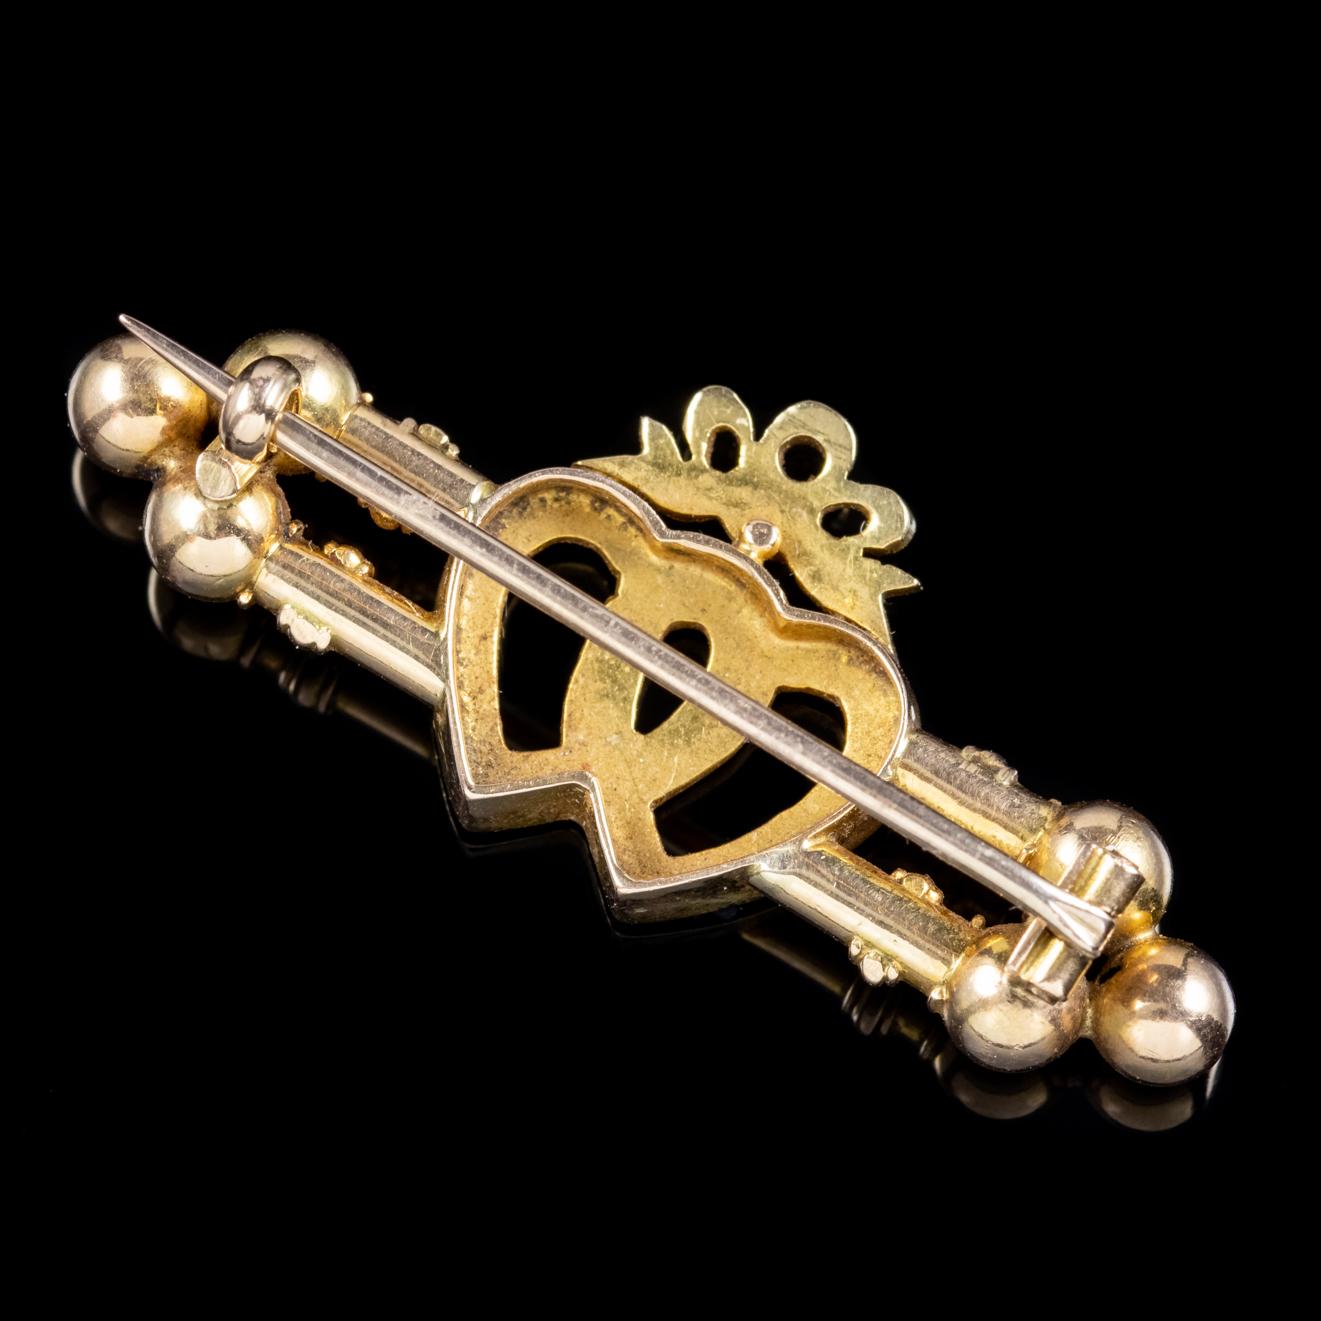 A lovely antique brooch from the Victorian era featuring a bow crowned on top of two entwined hearts which symbolize a loving eternal bond. 

Pearls are a true gift from Mother Nature and symbolize purity innocence and beauty which is why they are a